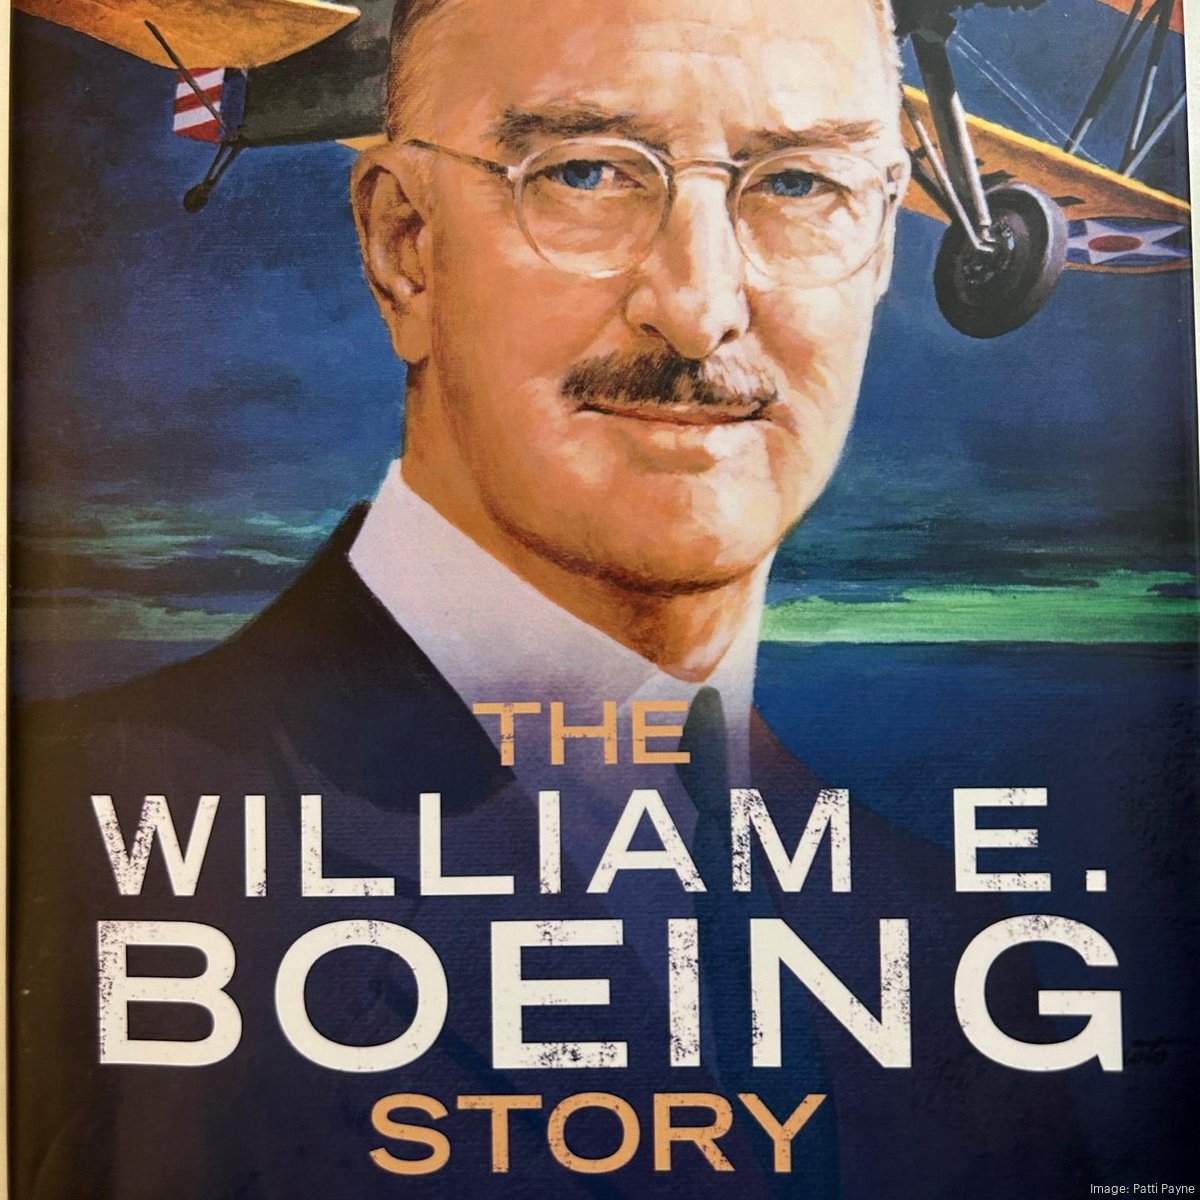 Boeing founder would be 'mortified' over company today, biographer says - Puget Sound Business Journal